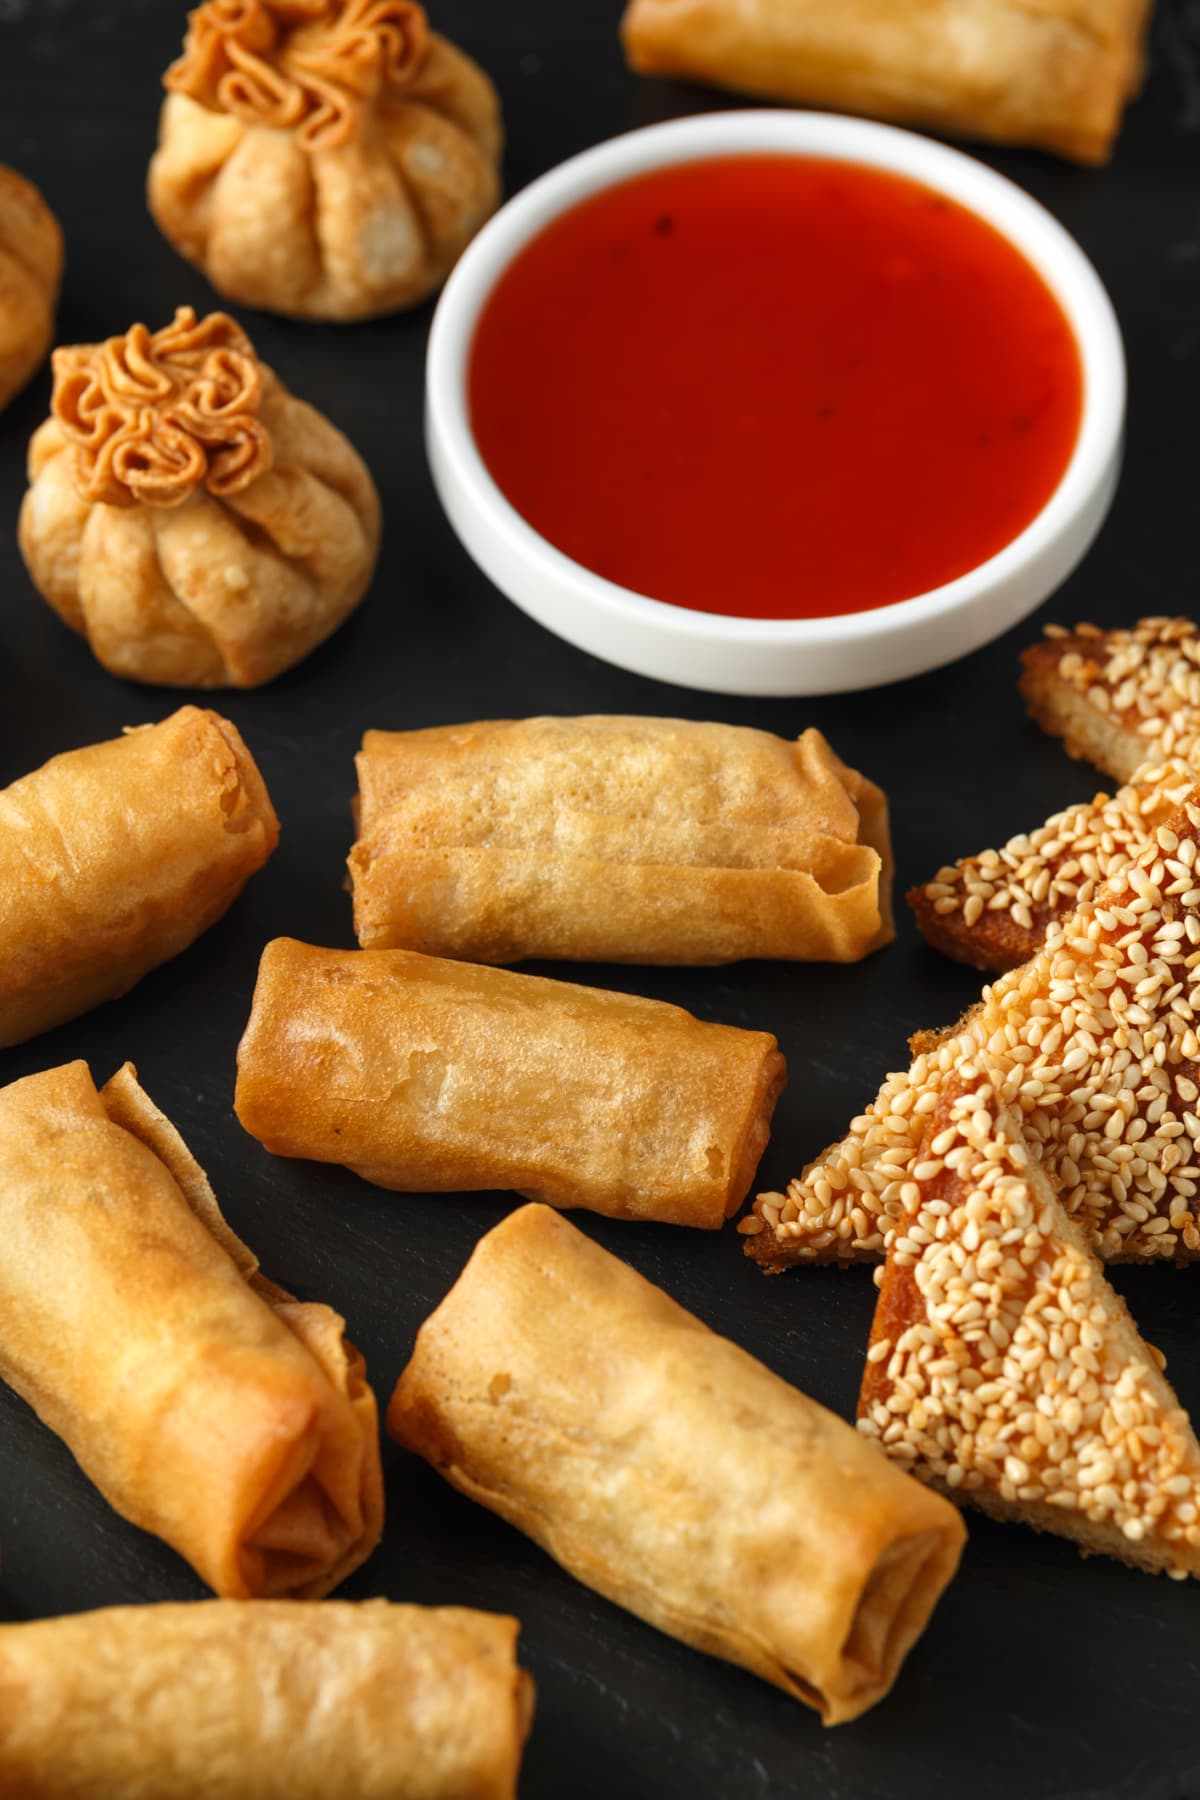 Crispy chicken wontons and vegetable spring rolls with a dish of sweet chili sauce